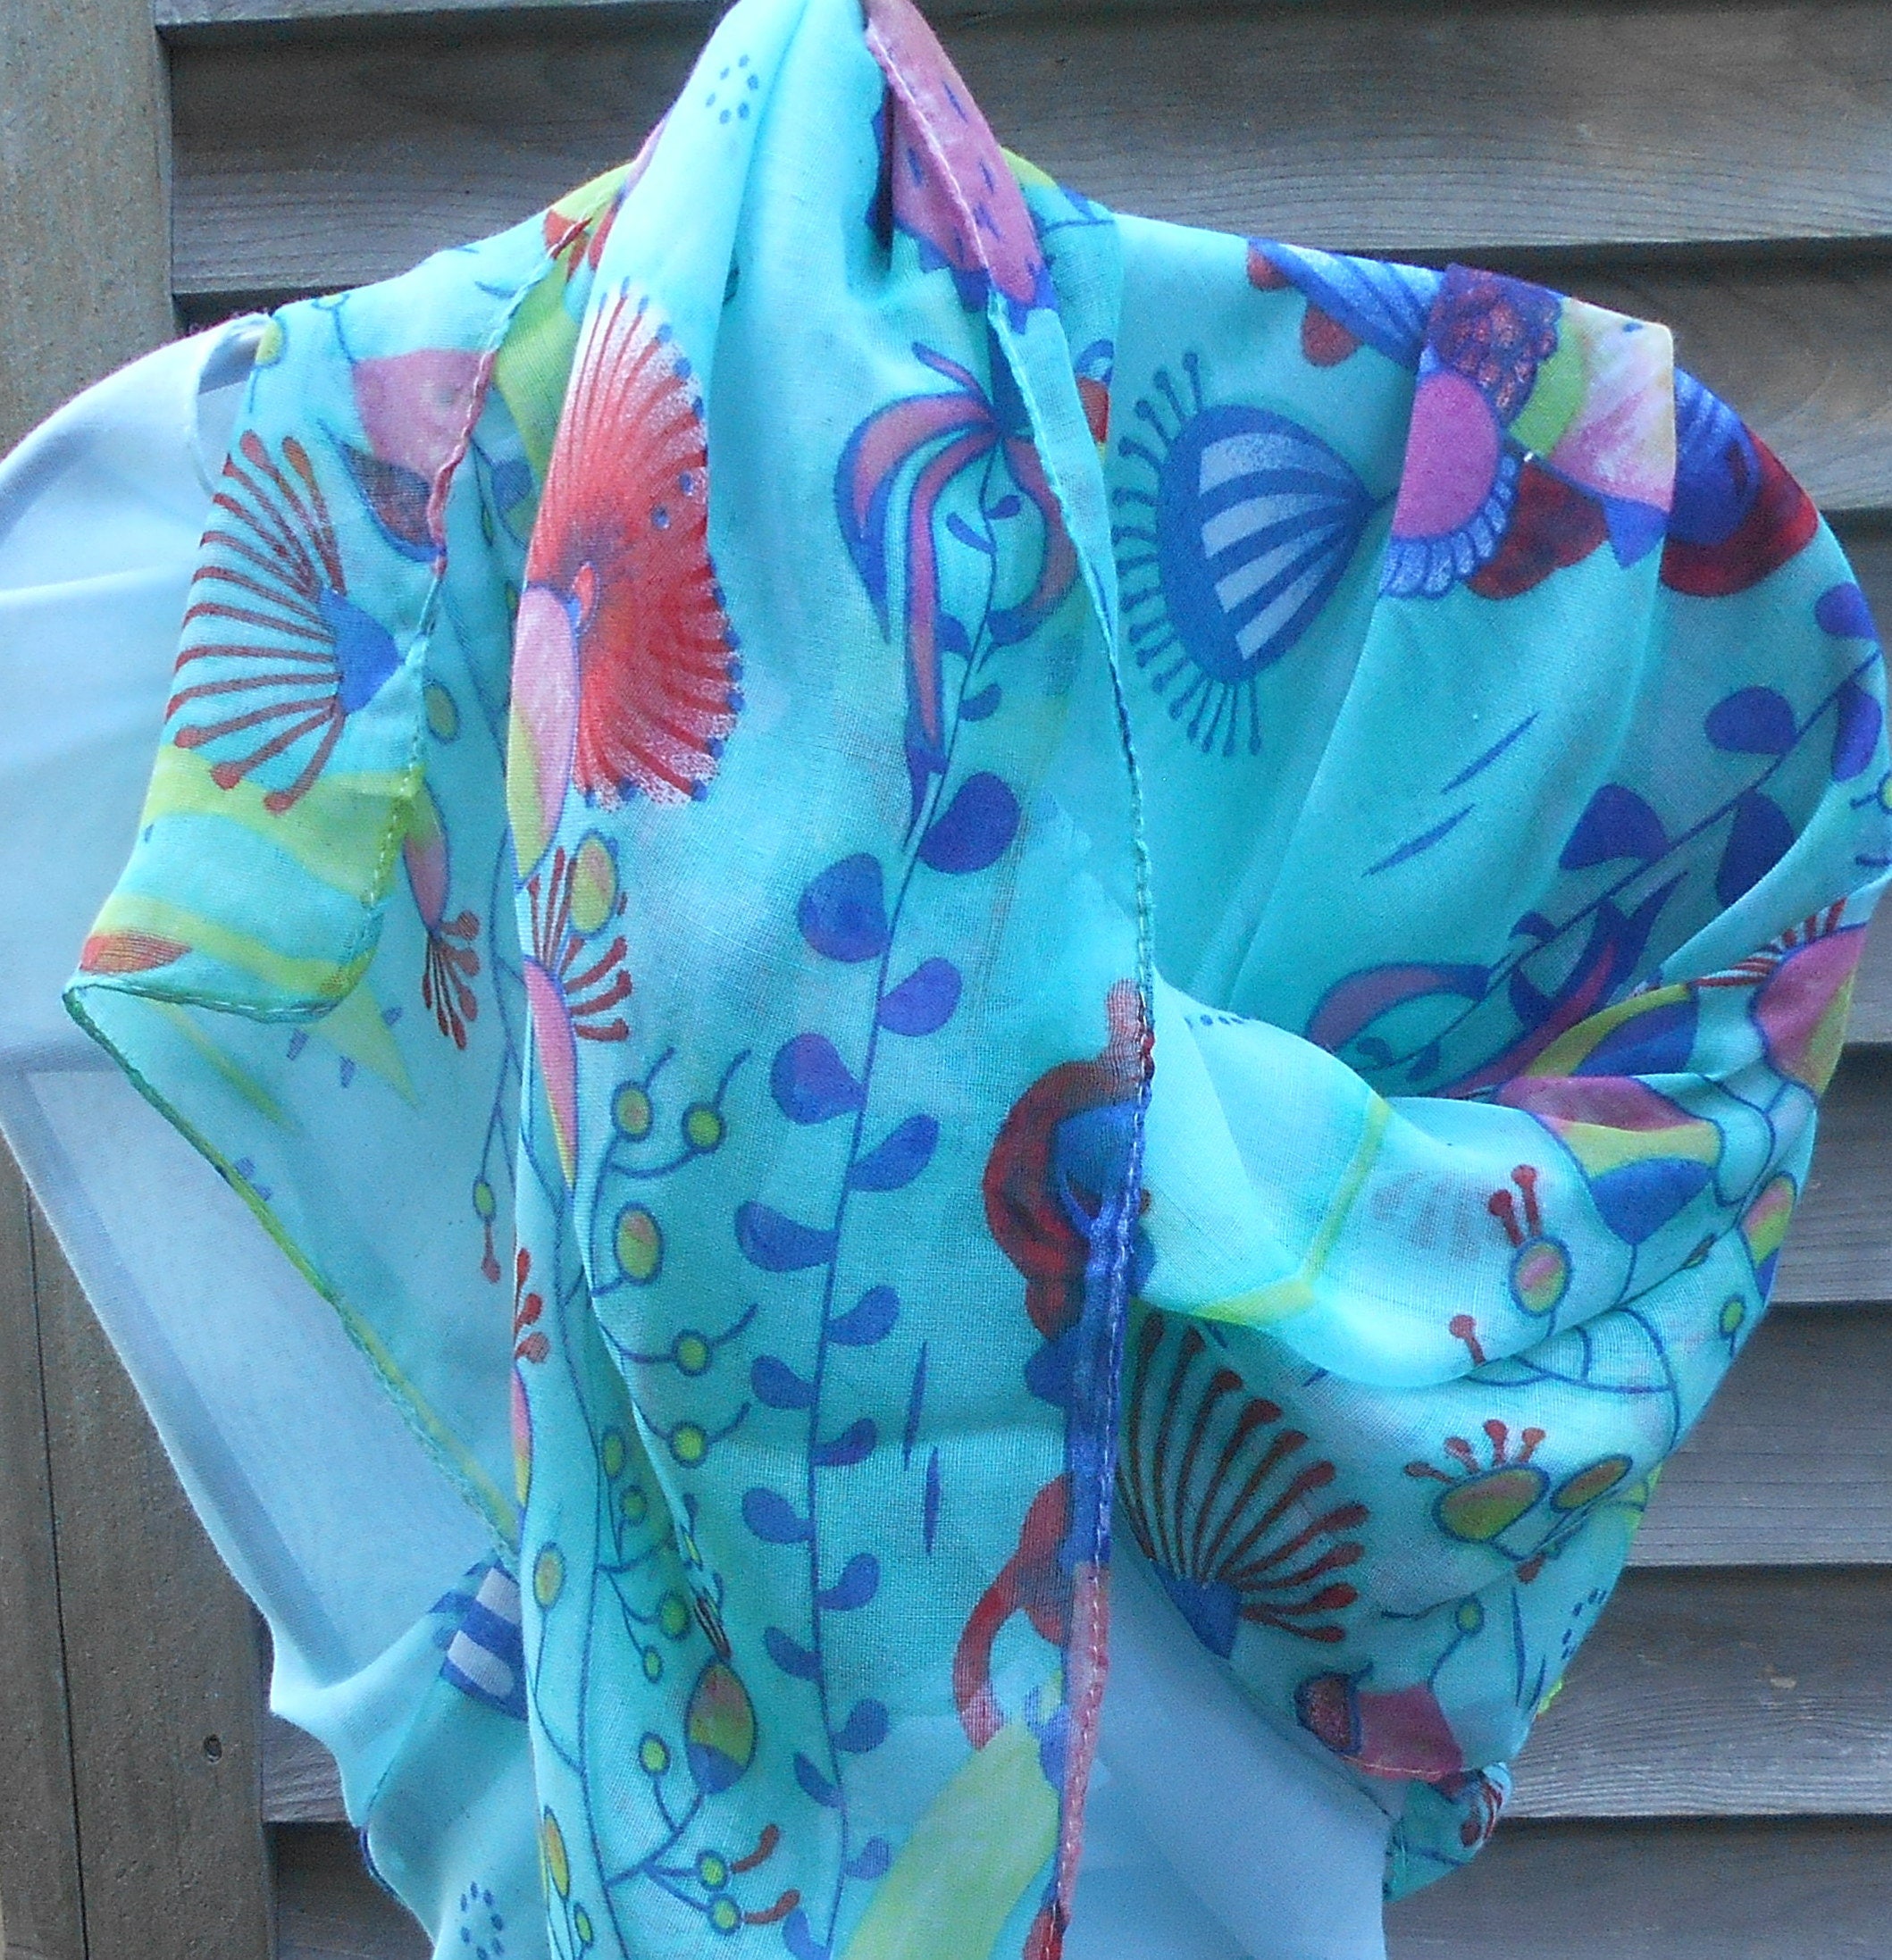 Festival Scarf,Fish Scarf,Turquoise Fashion Scarf,Scarf with Fish, Cotton  Summer Scarves,Beach Cover-up, Wedding Shawl,Best Friend Gift